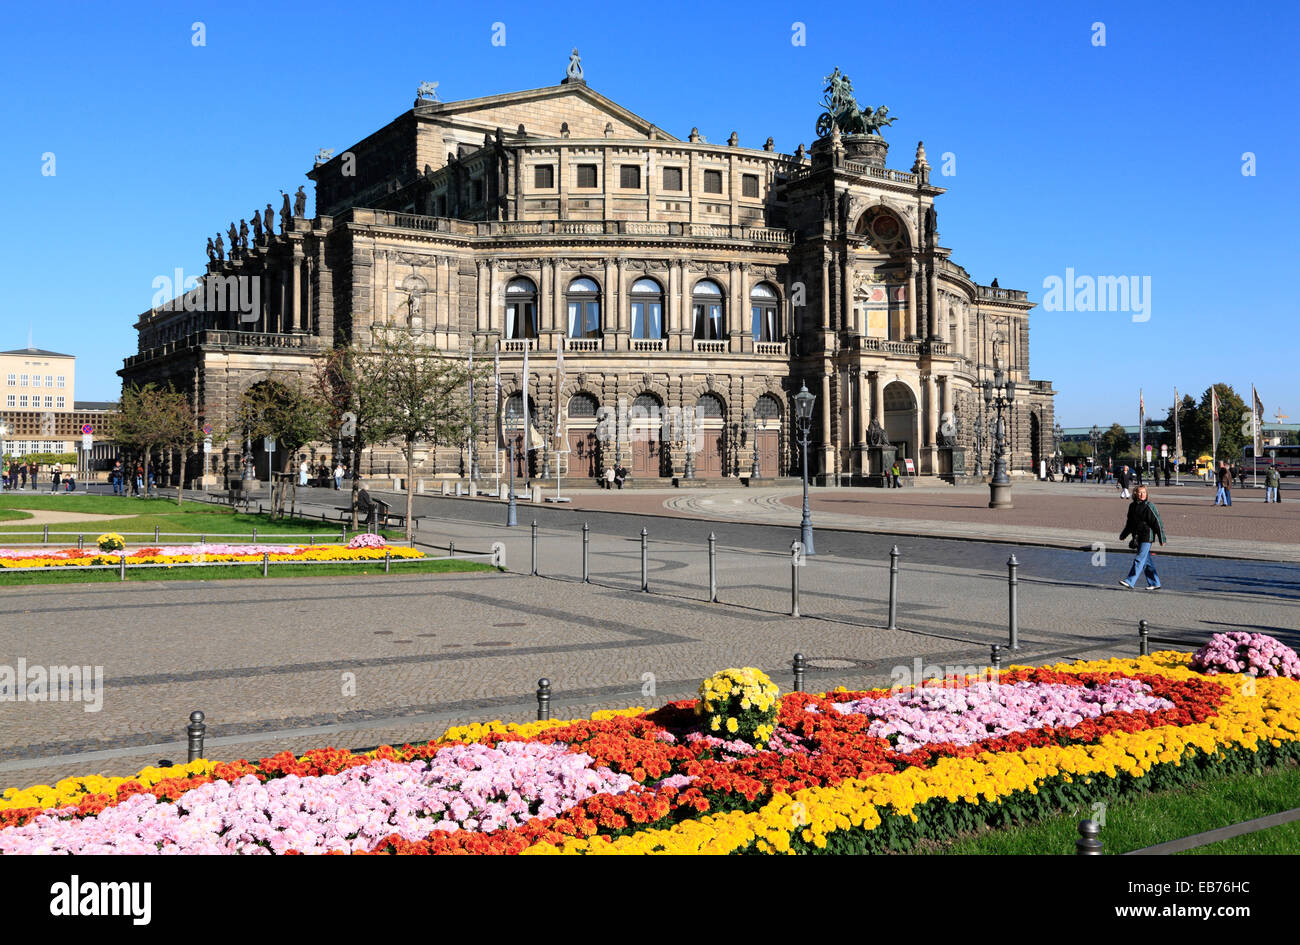 Semperoper, Semper opera house in the evening, Dresden, Saxony, Germany, Europe Stock Photo